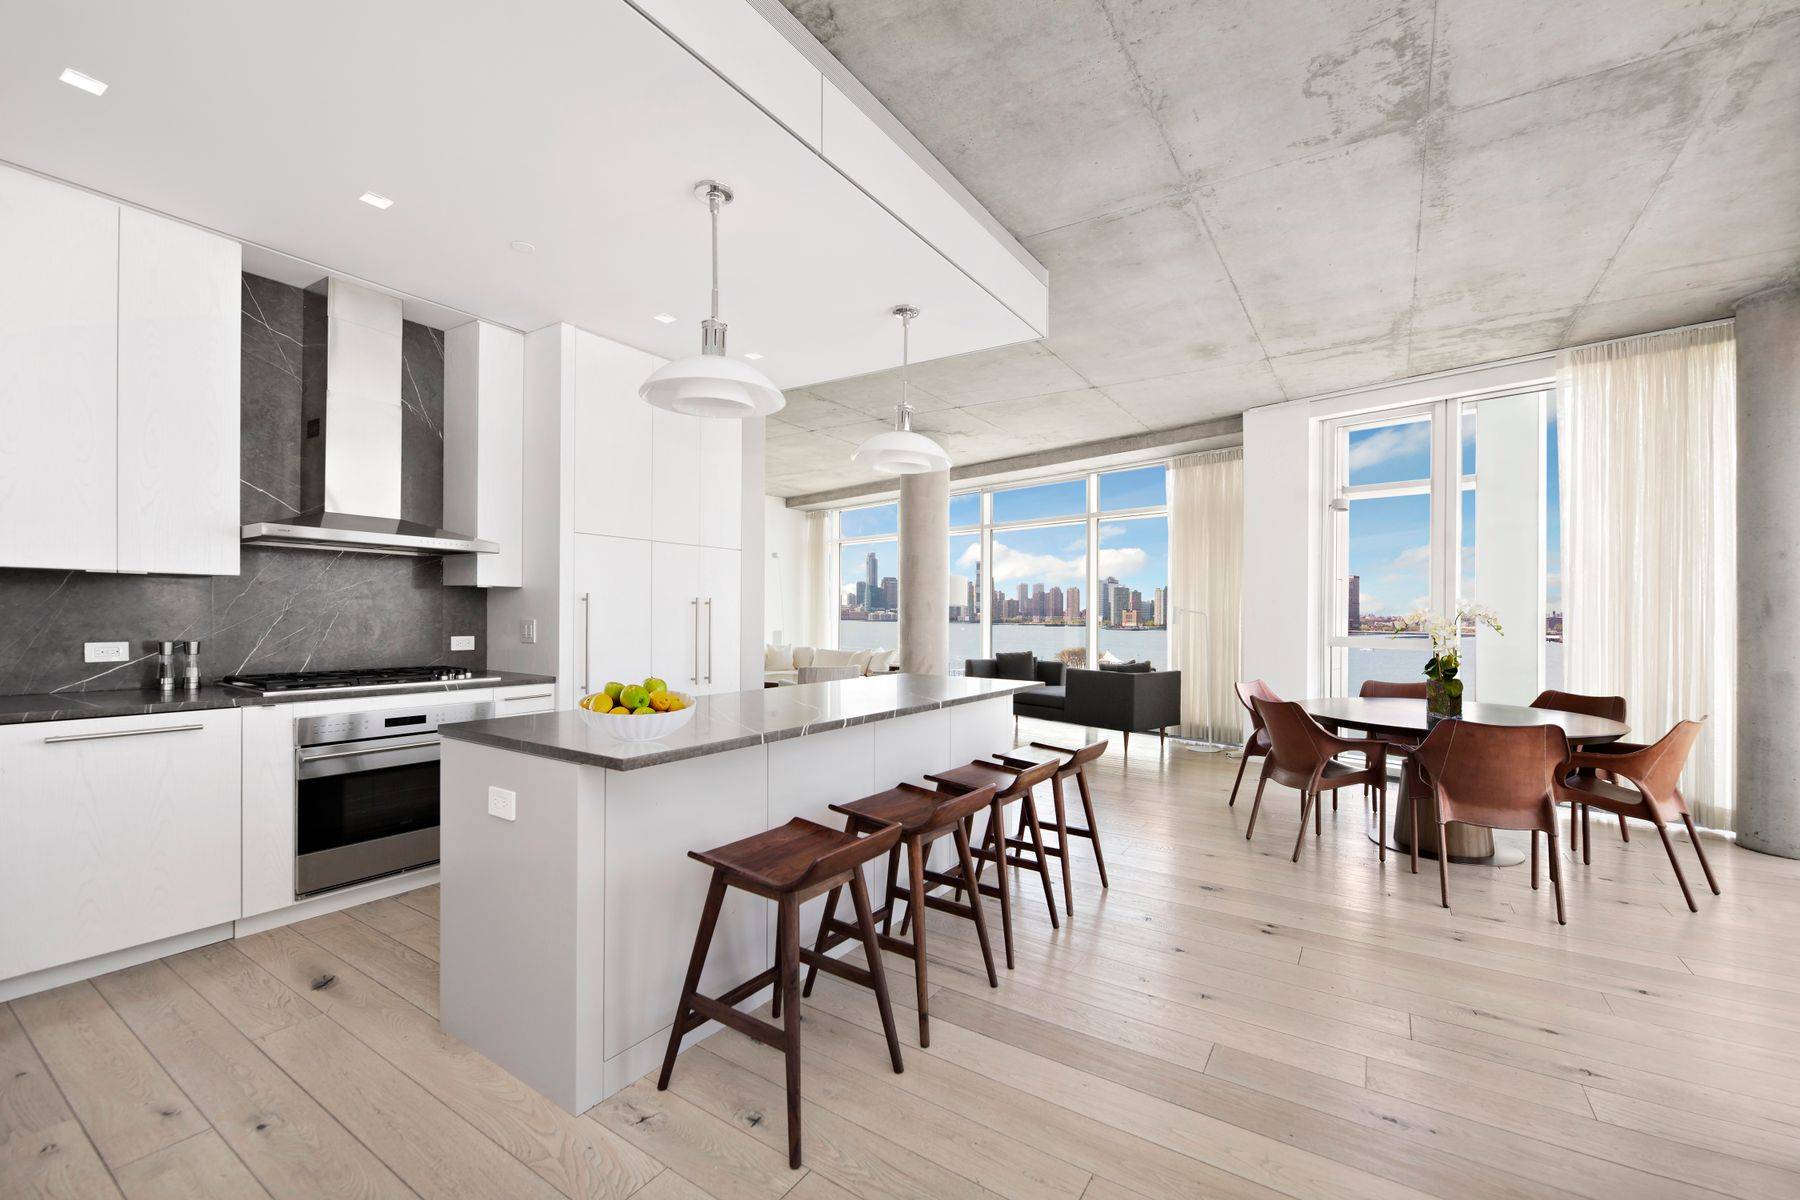 Two Terraces, Two Bedrooms, Two Baths and Just Renovated with Gorgeous New Chef's Kitchen in the iconic Richard Meier's 173 Perry Street Condominium.